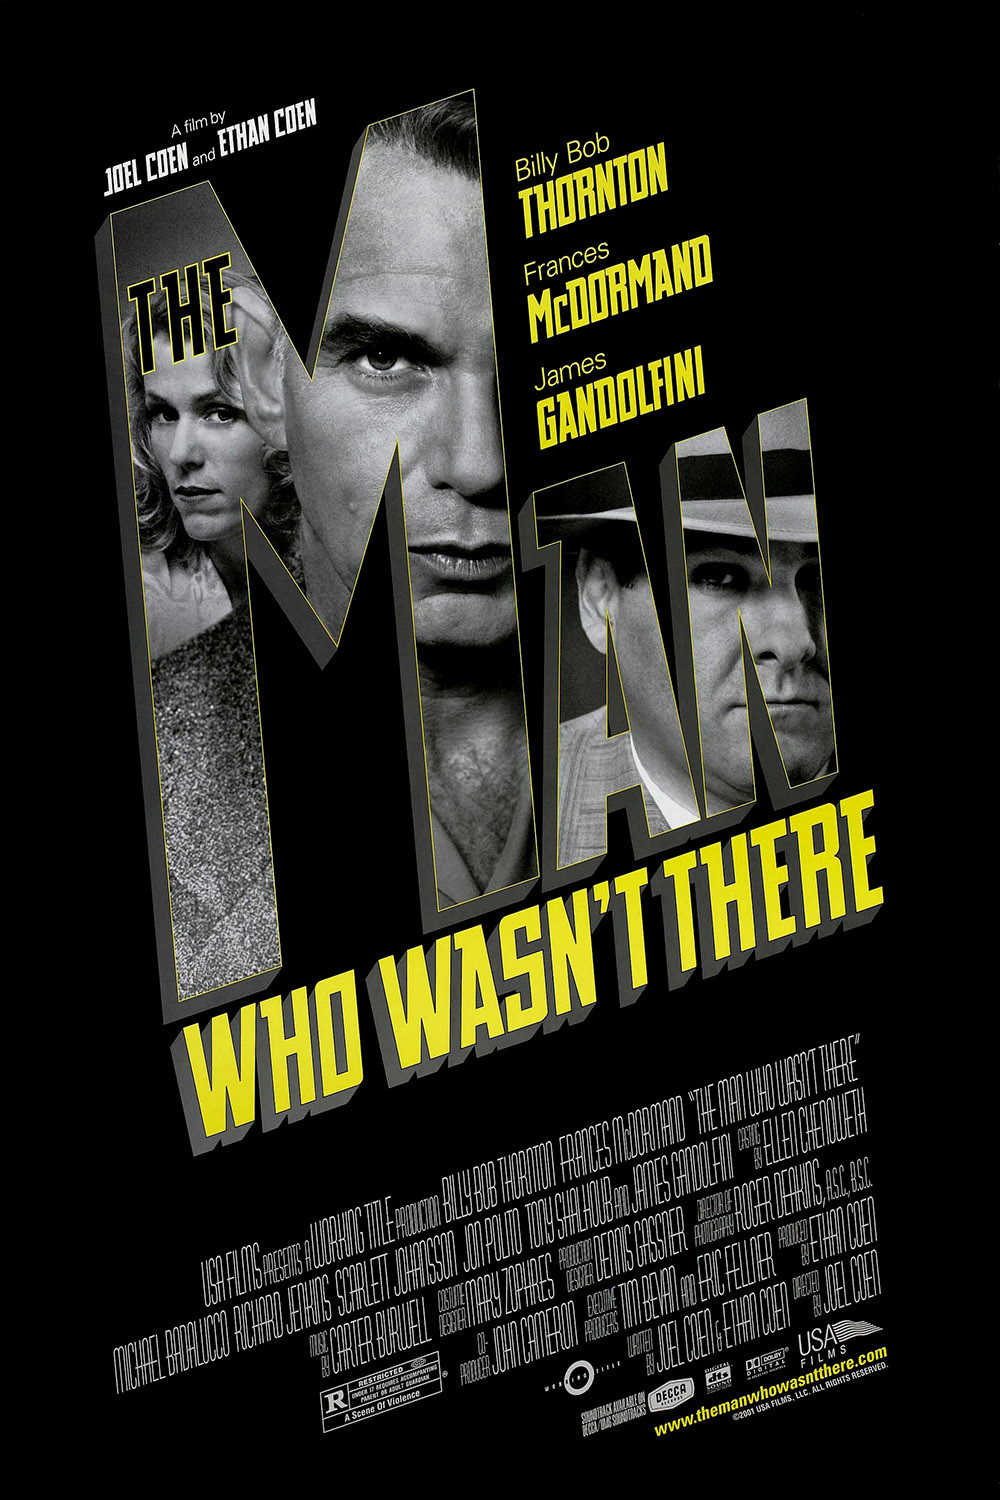 The Man Who Wasn't There movie